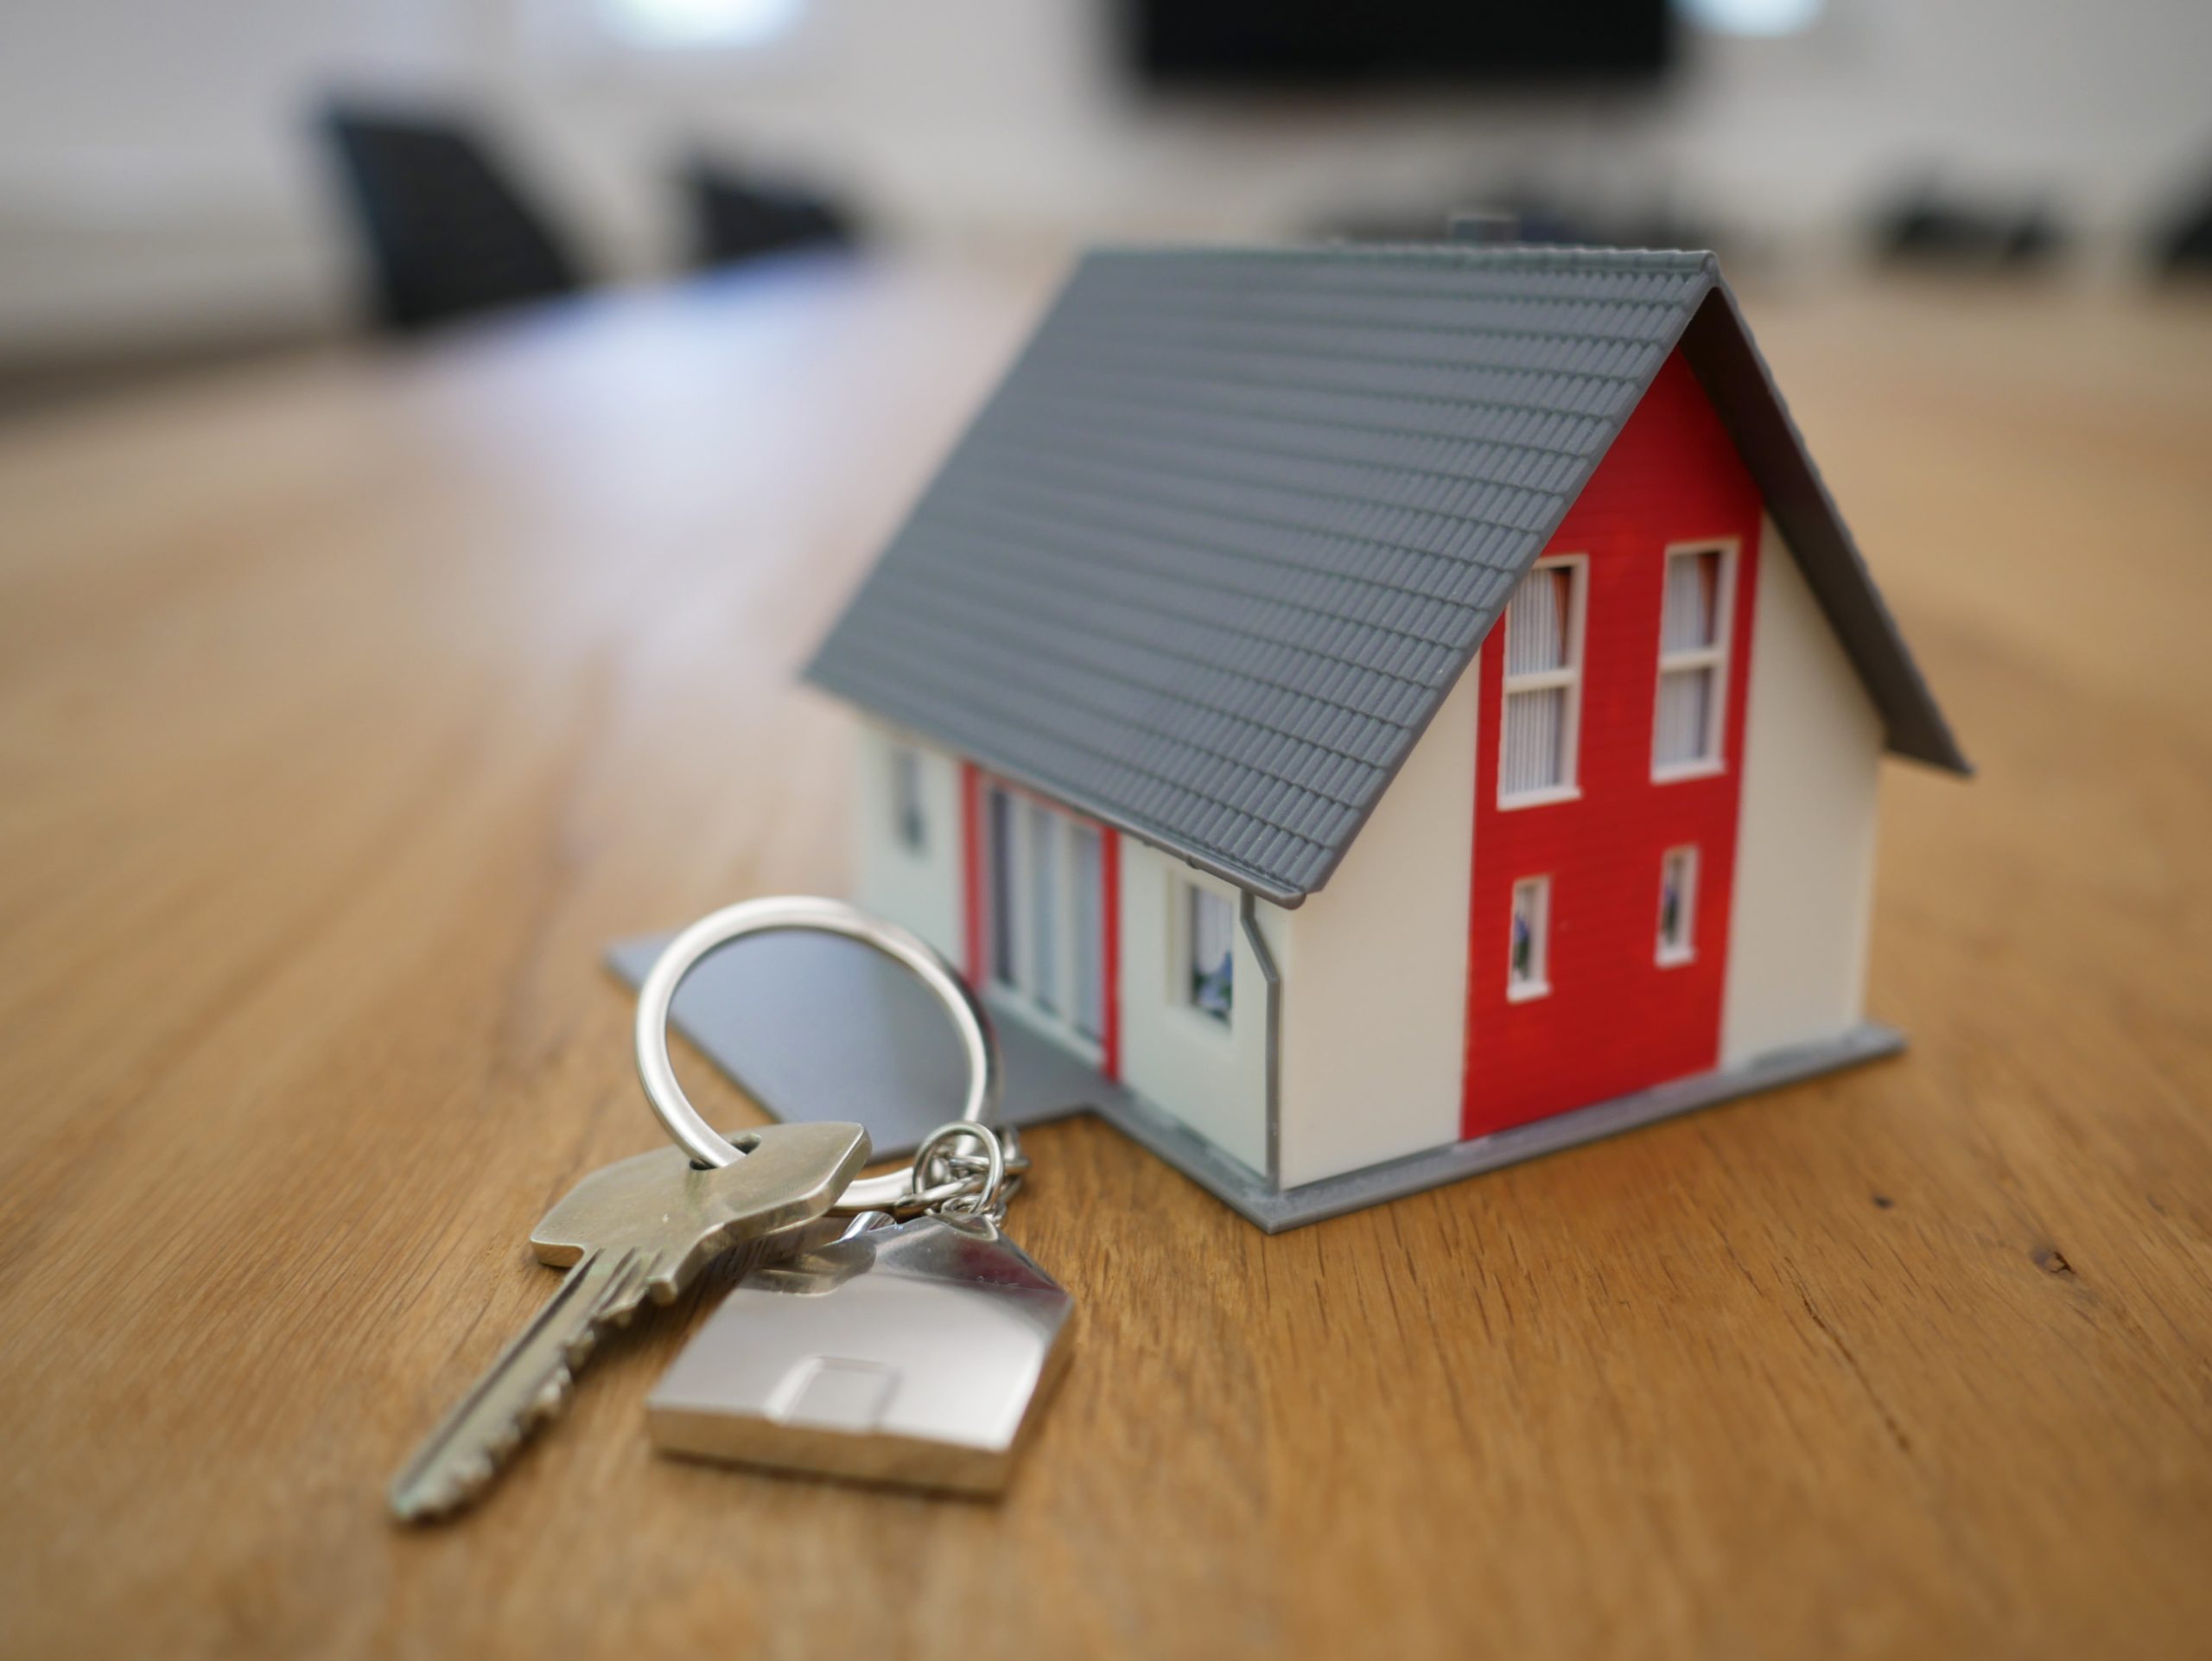 A small, model house next to a set of keys